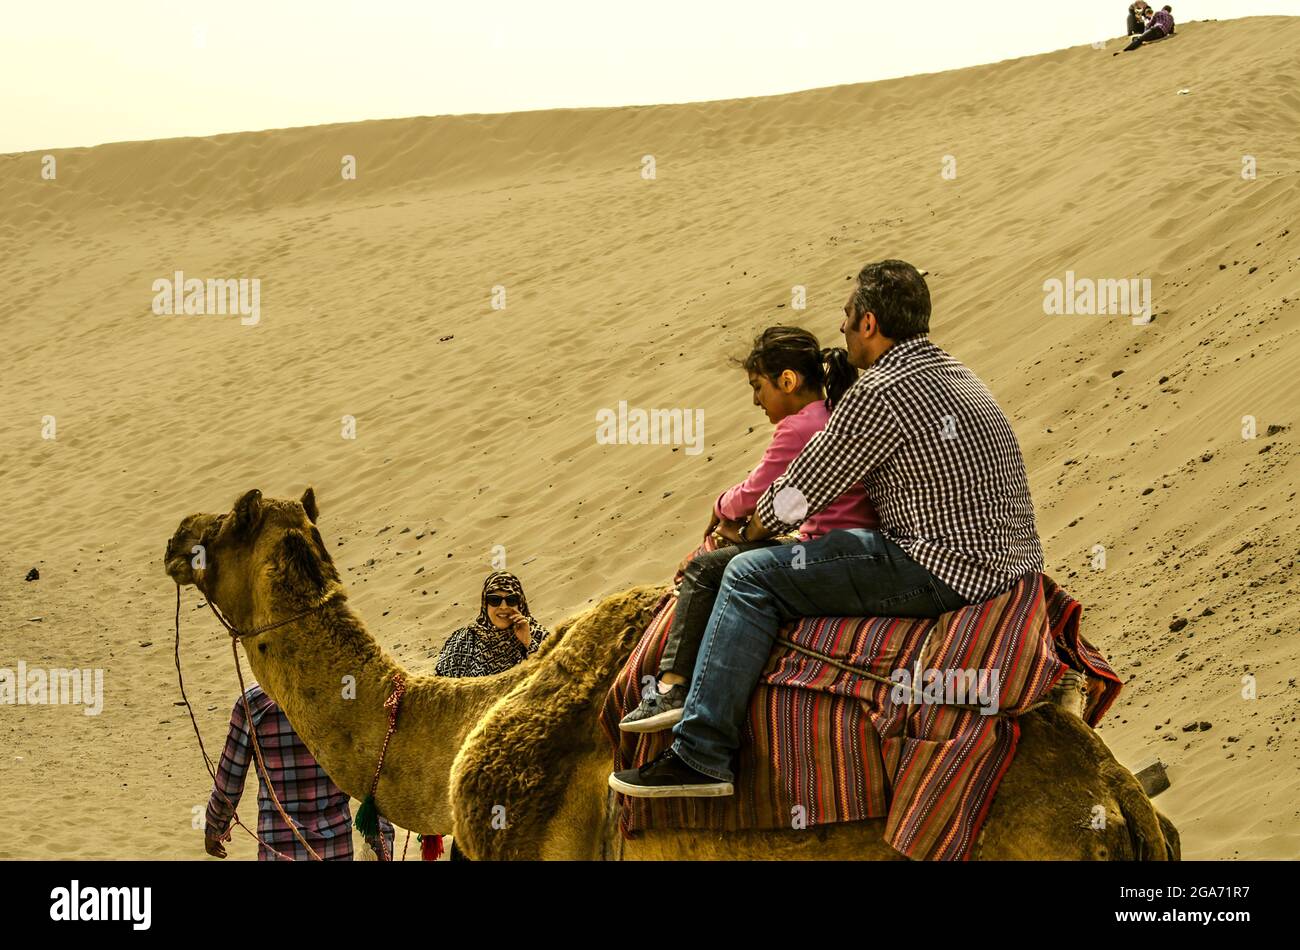 Yazd, Desert, Iran, February 20, 2021: Man with a little girl sitting on a camel covered with a bright carpet, accompanied by a guide and a woman watc Stock Photo